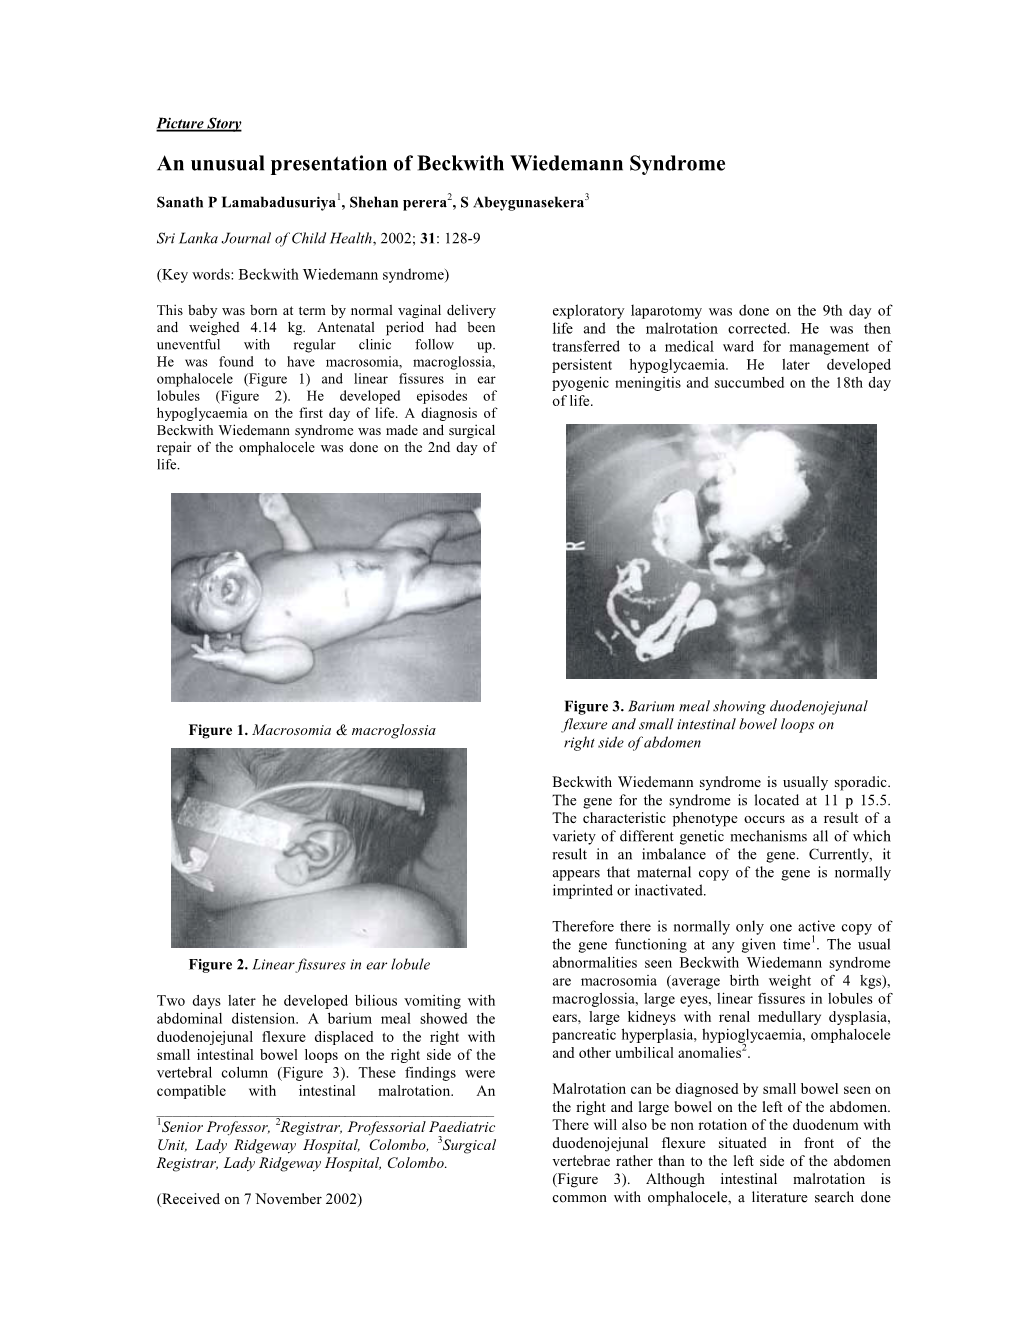 An Unusual Presentation of Beckwith Wiedemann Syndrome